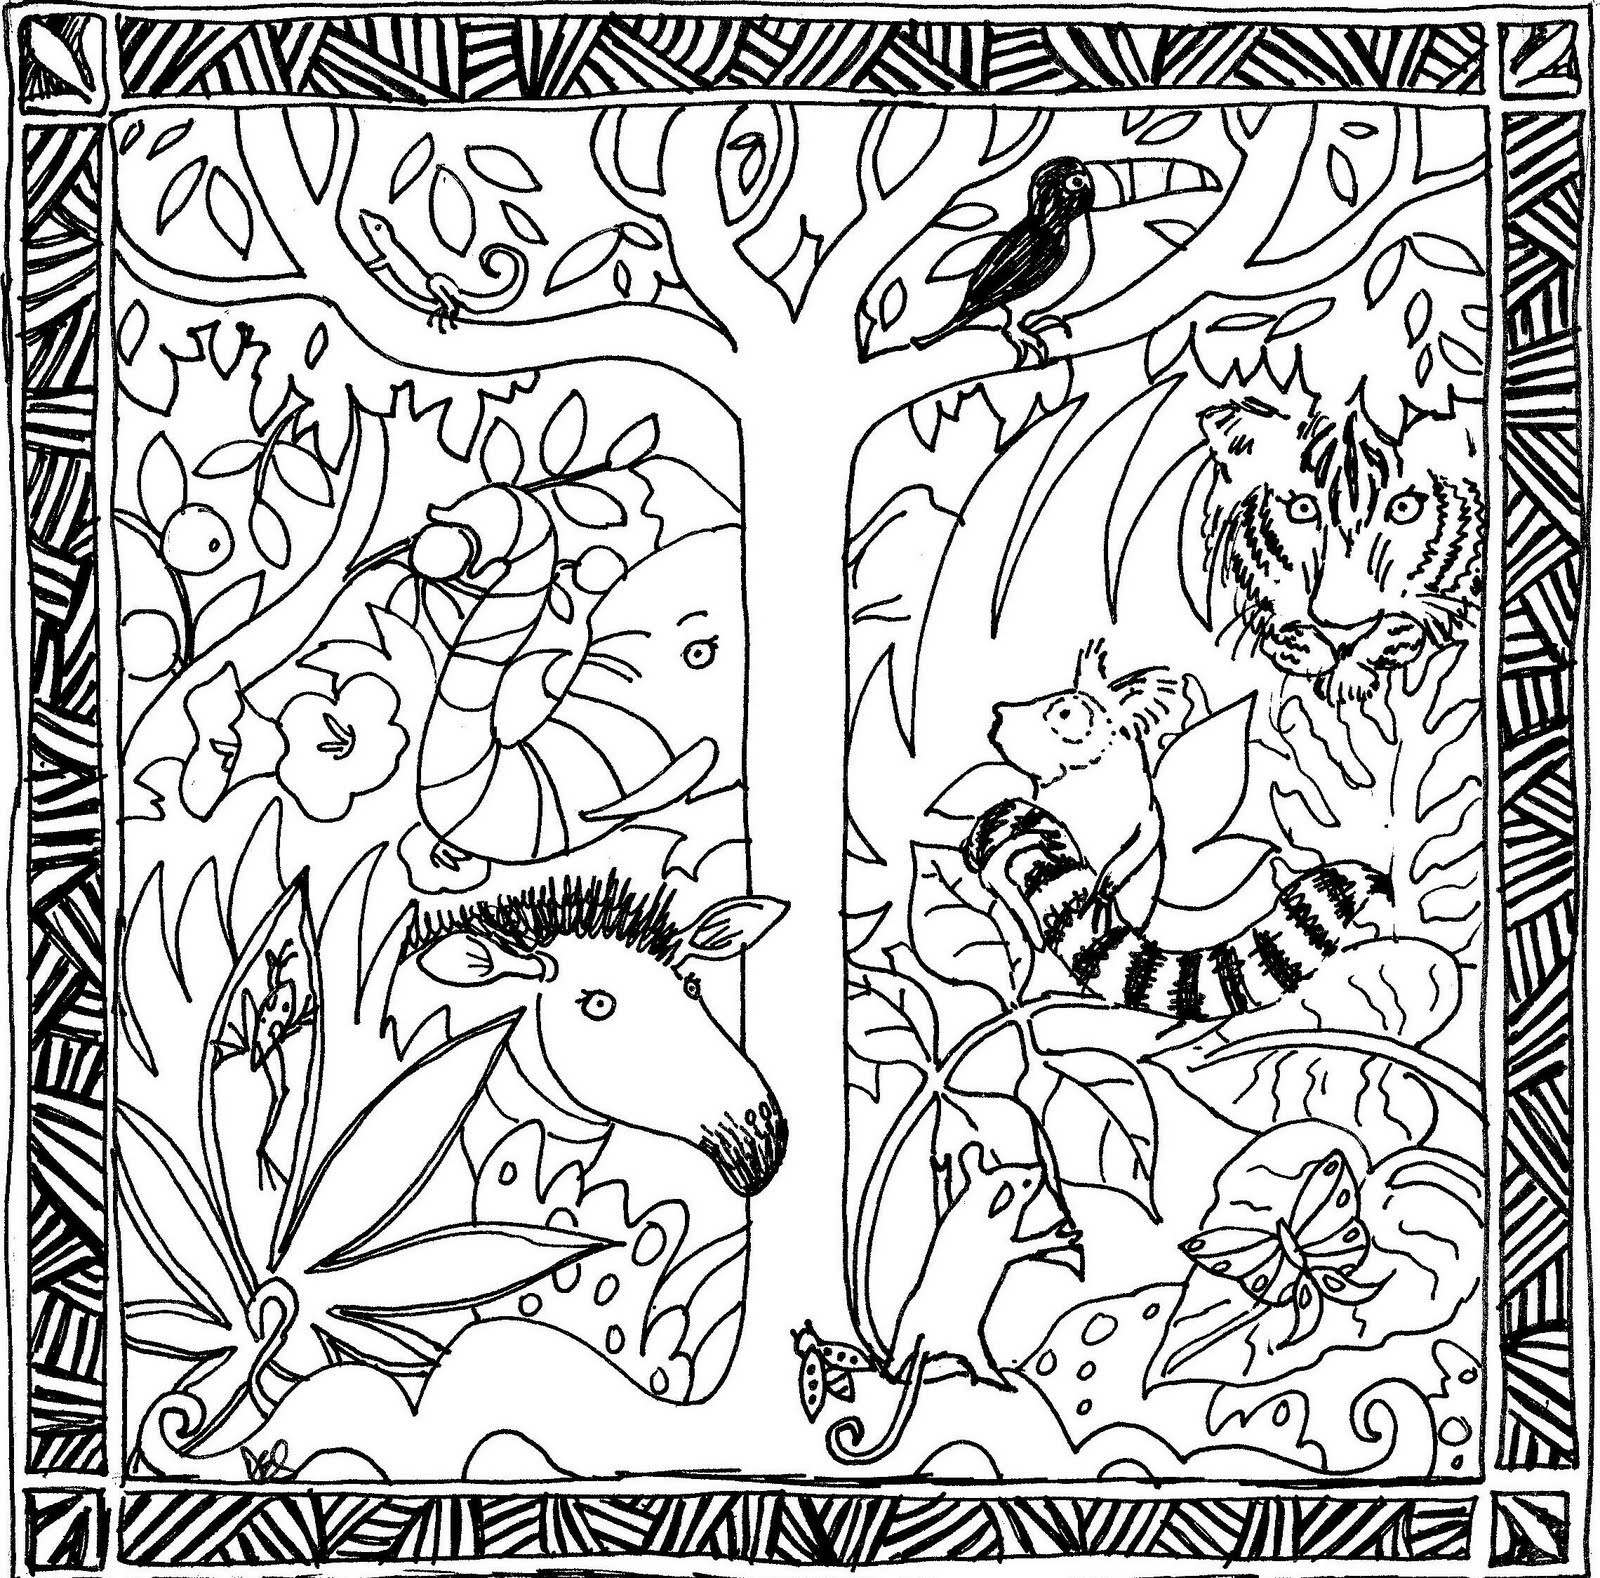 Animals In The Rainforest Coloring Pages Coloring Ideas Rainforestoloring Pages To Print Wealth Launching